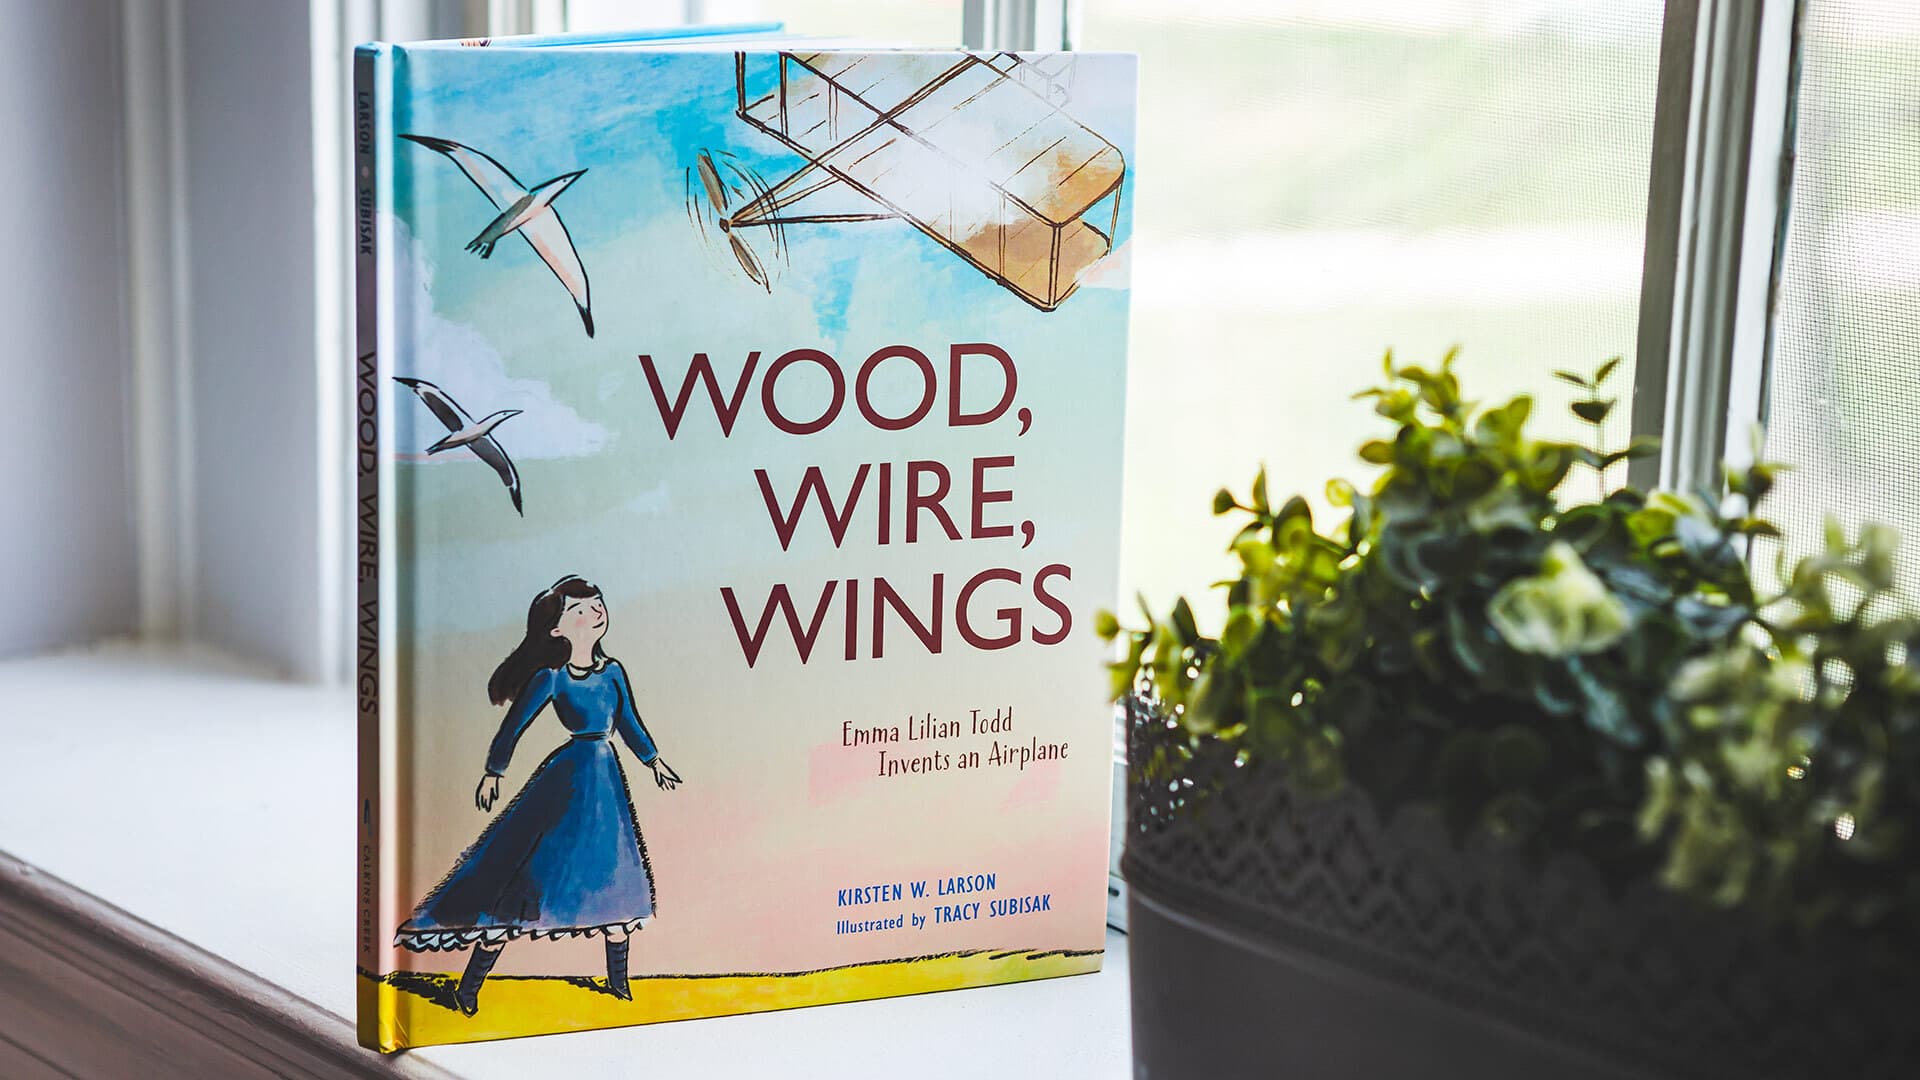 "Wood, Wire, Wings" book cover